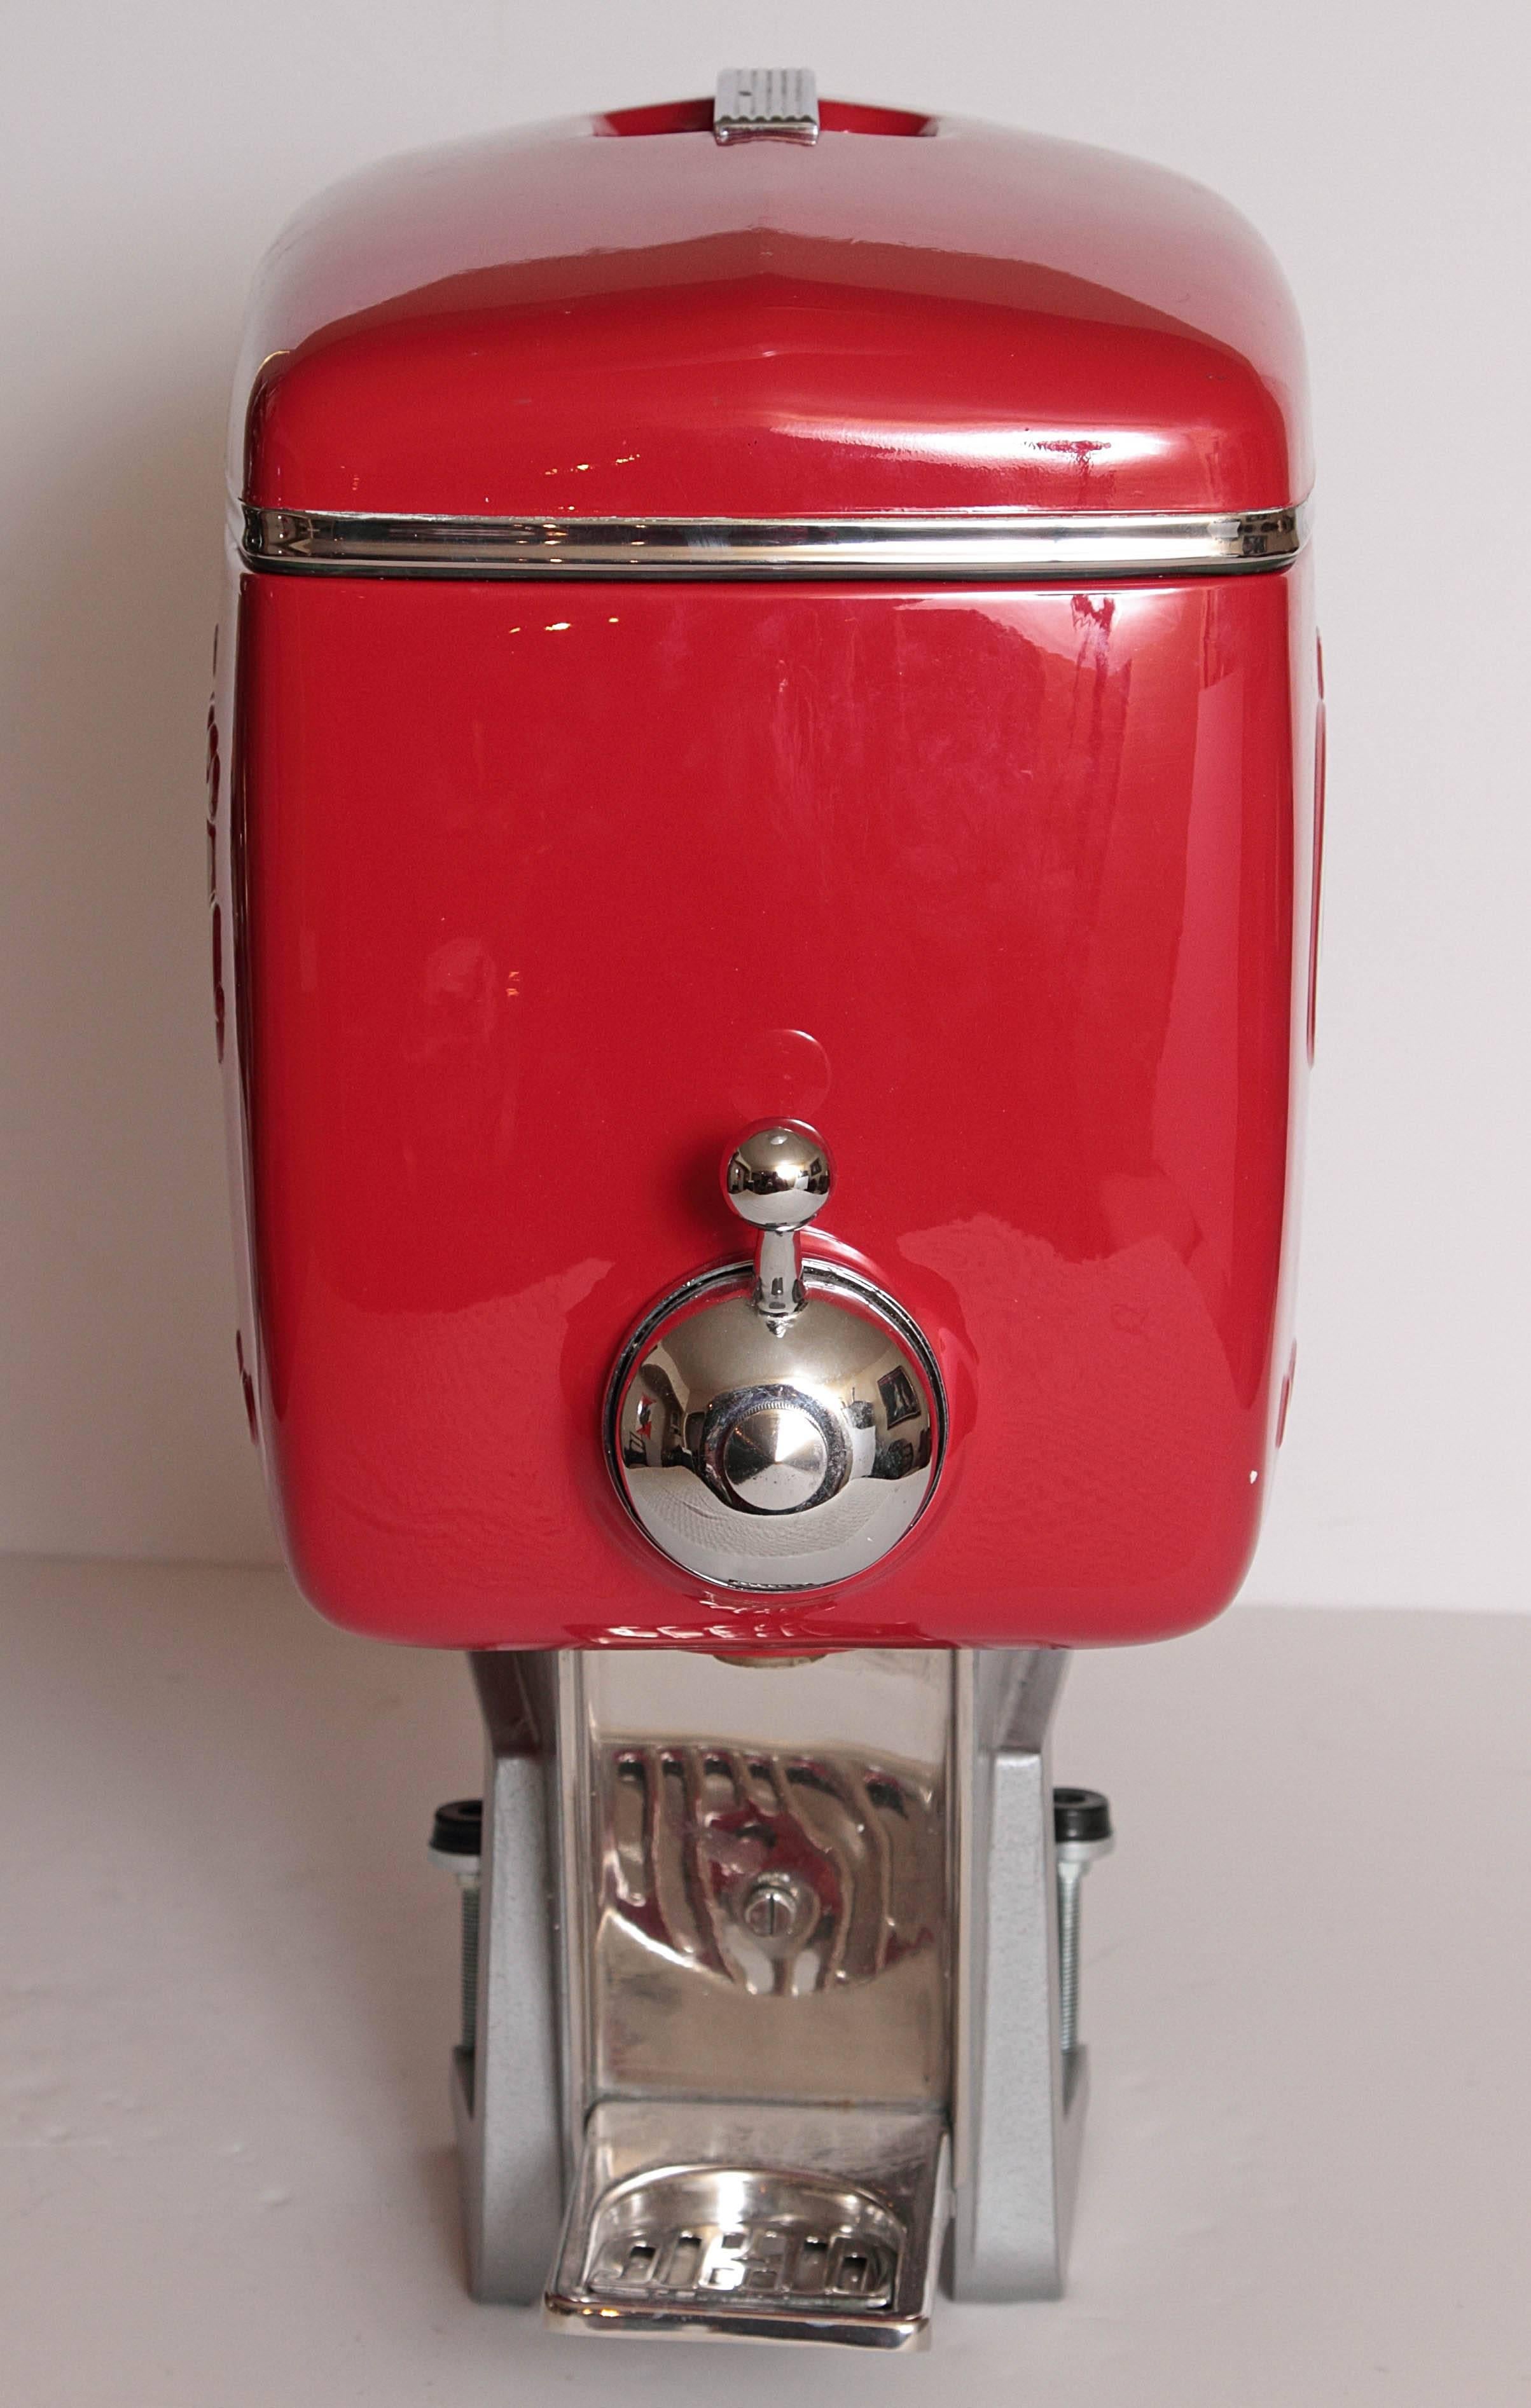 Machine Age Mid Century Pristine Complete Raymond Loewy Dispenser for Coca Cola, 1948

One of the iconic original post Art Deco Loewy for Coke designs, and produced by Dole Valve. 
Three major Classic design hits.

Amazing condition, untested, but